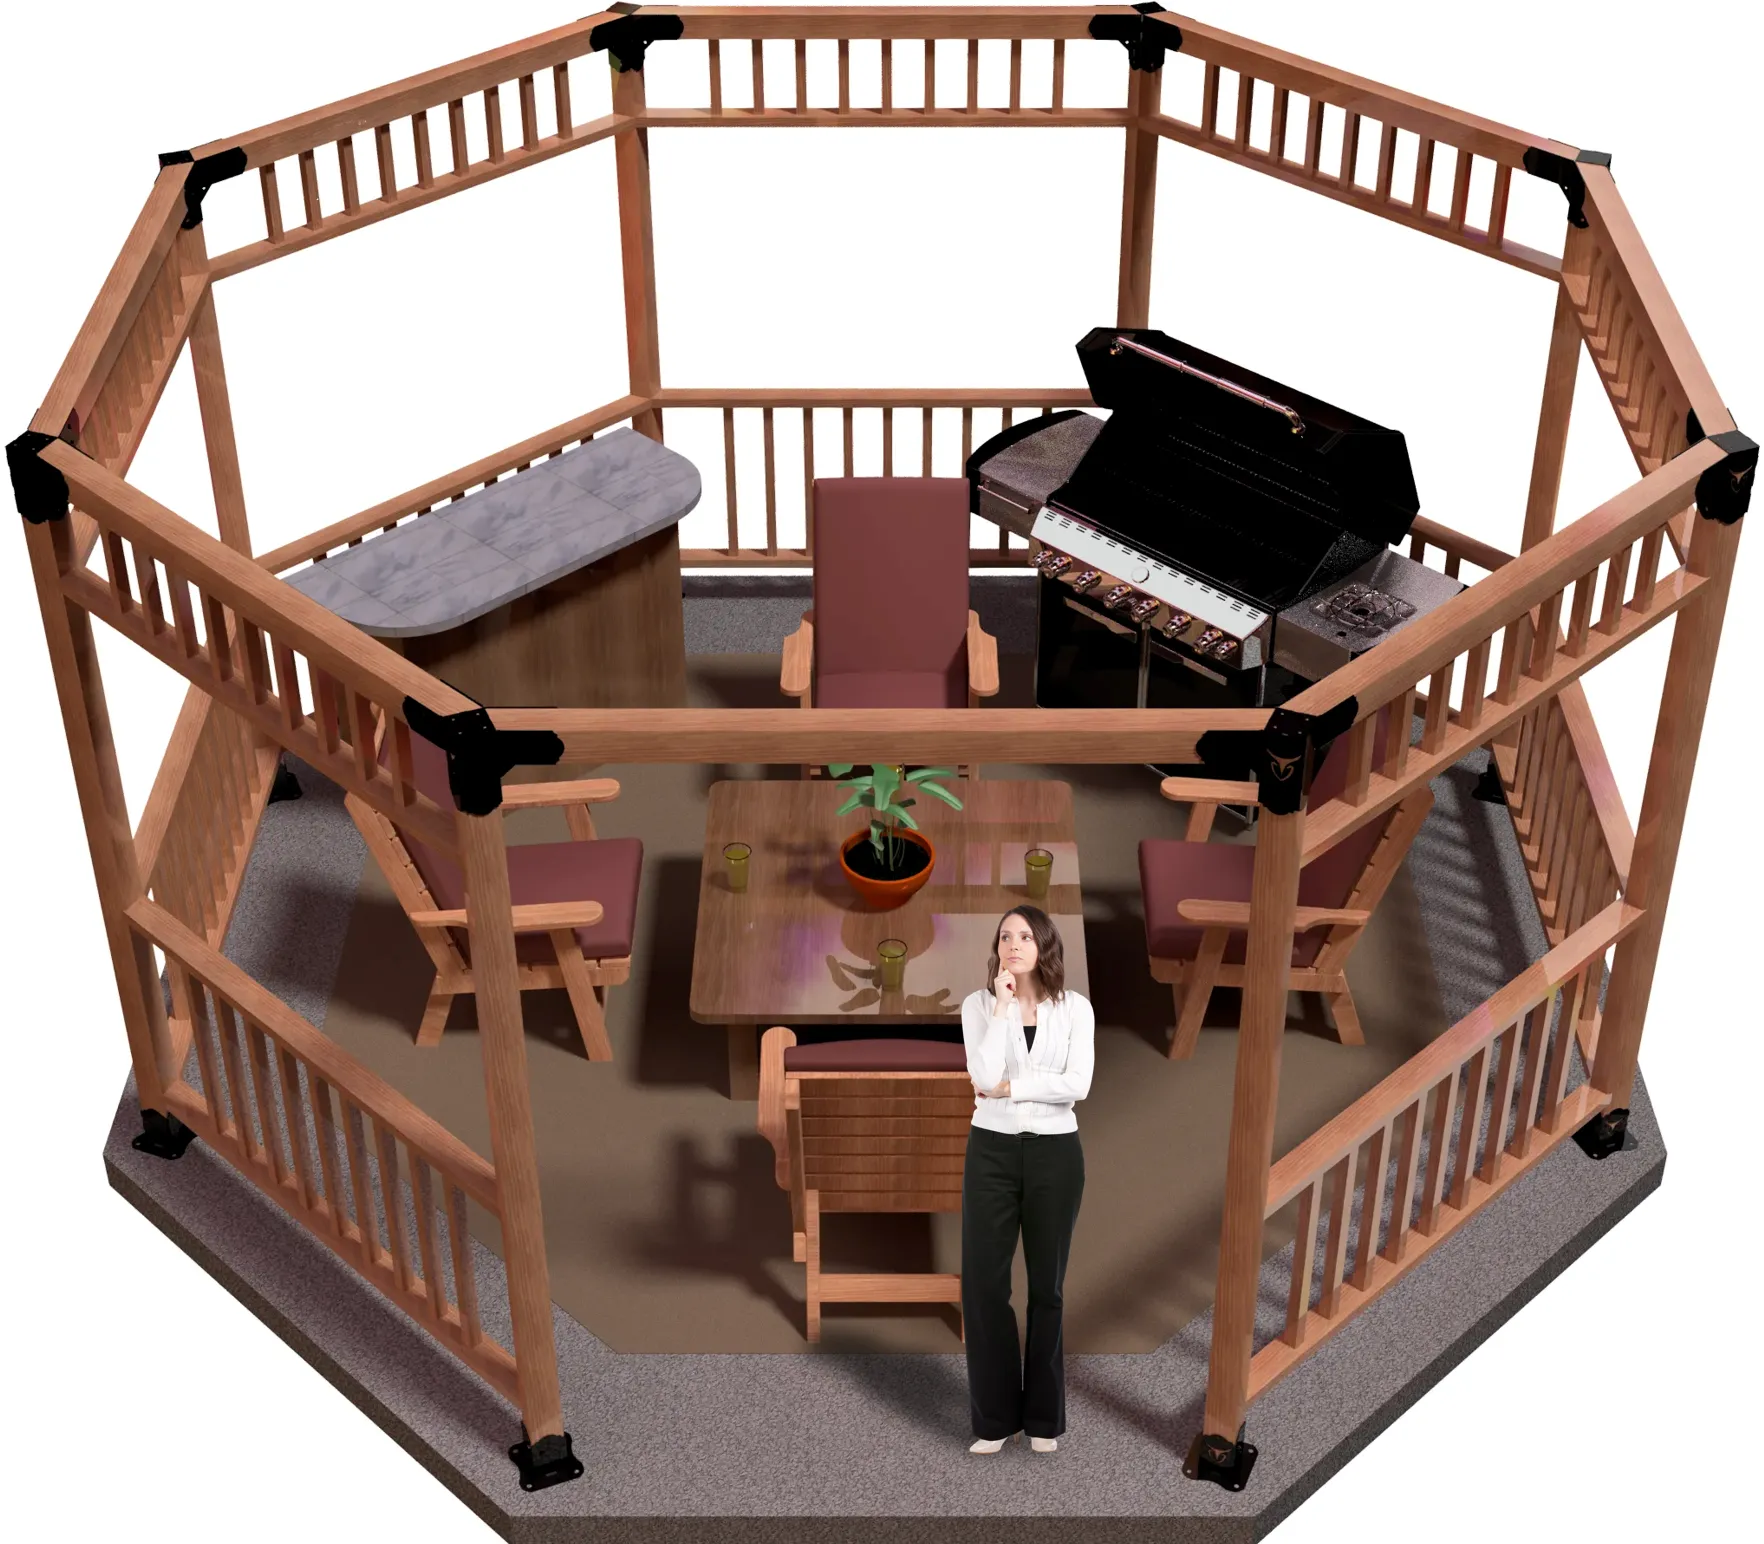 4X4 Surface Mounted Octagon Pergola with grill, bar, and casual furniture. Lattice fenced walls design.